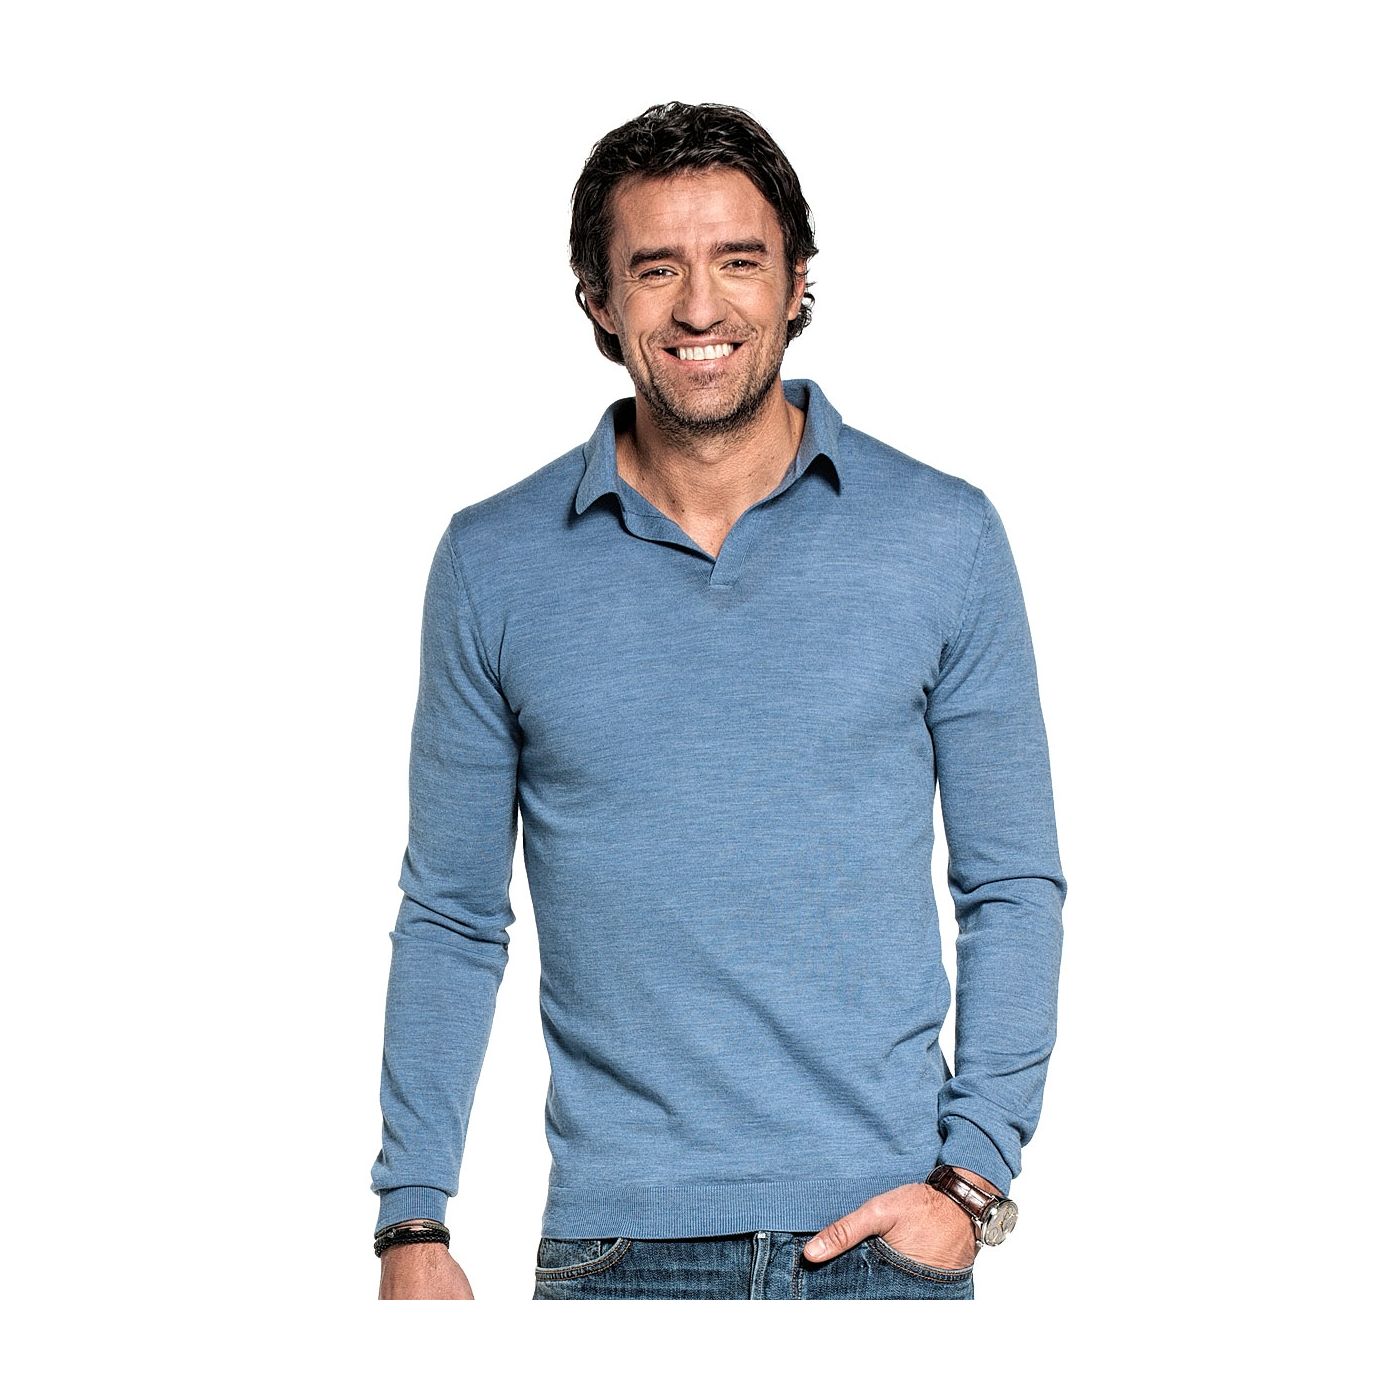 Polo long sleeve without buttons for men made of Merino wool in Light blue